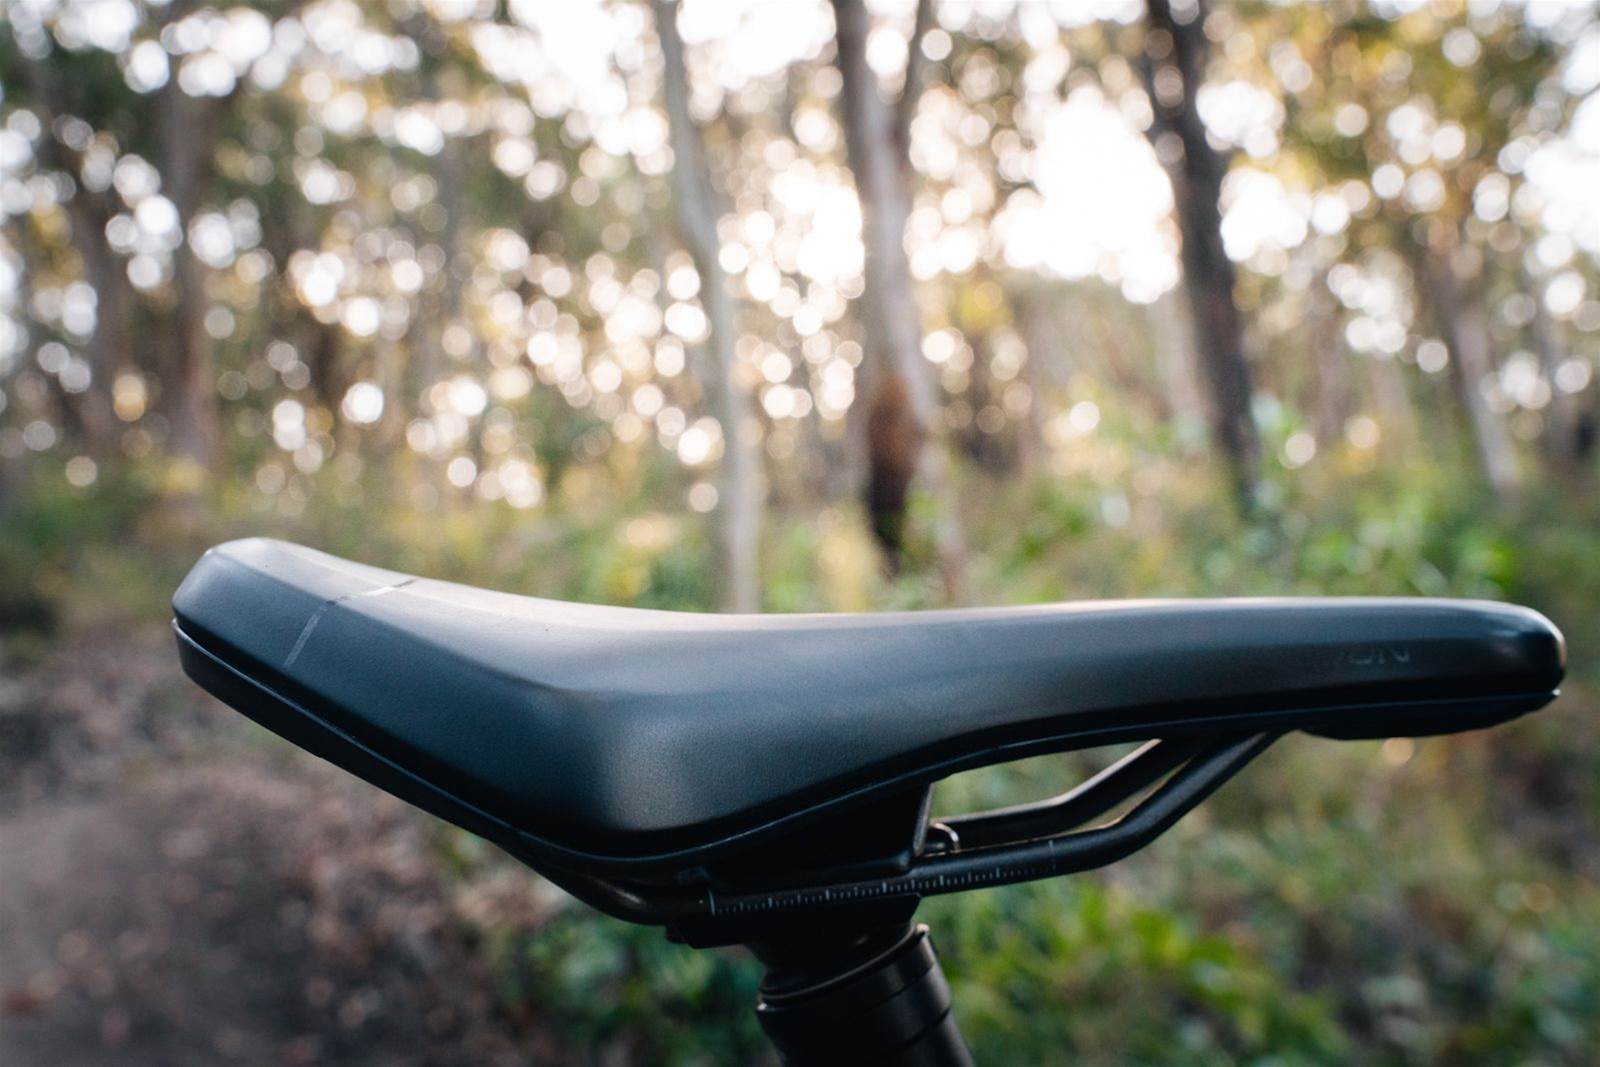 The first thing you’ll notice about the Aidon saddle is the raised rear.